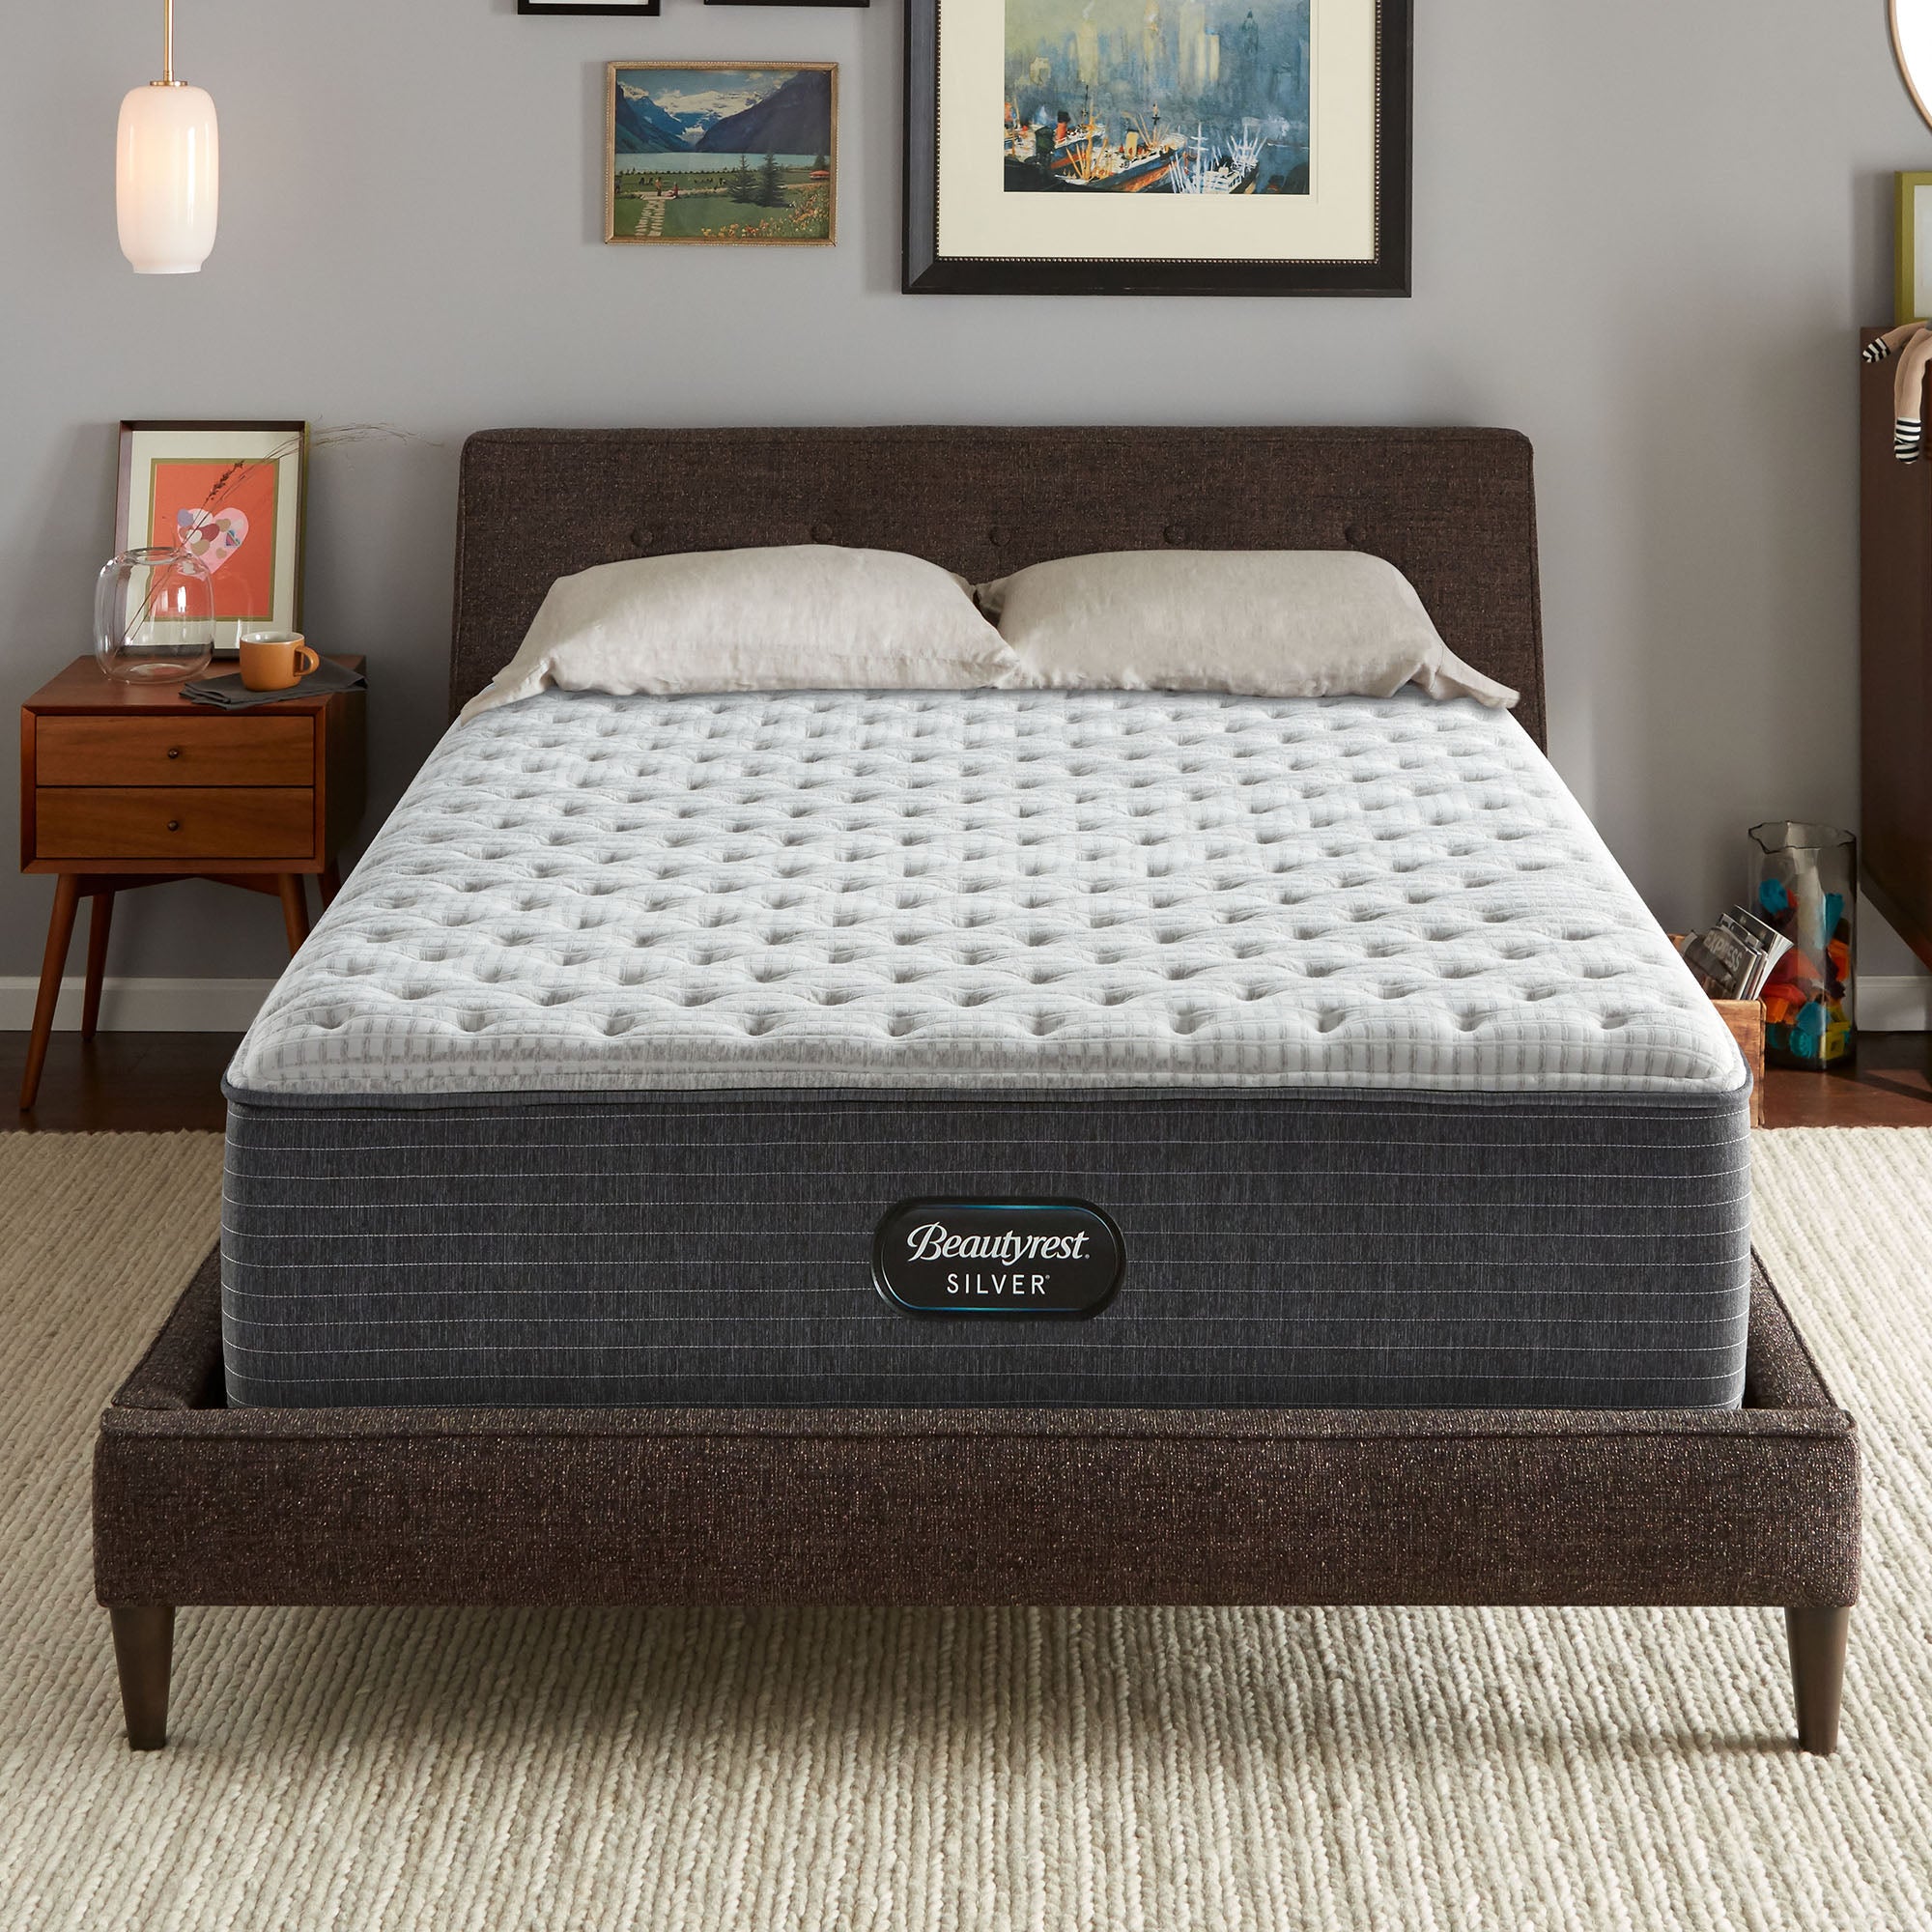 The Beautyrest Silver BRS900-C Extra Firm mattress in a bedroom on a brown bed